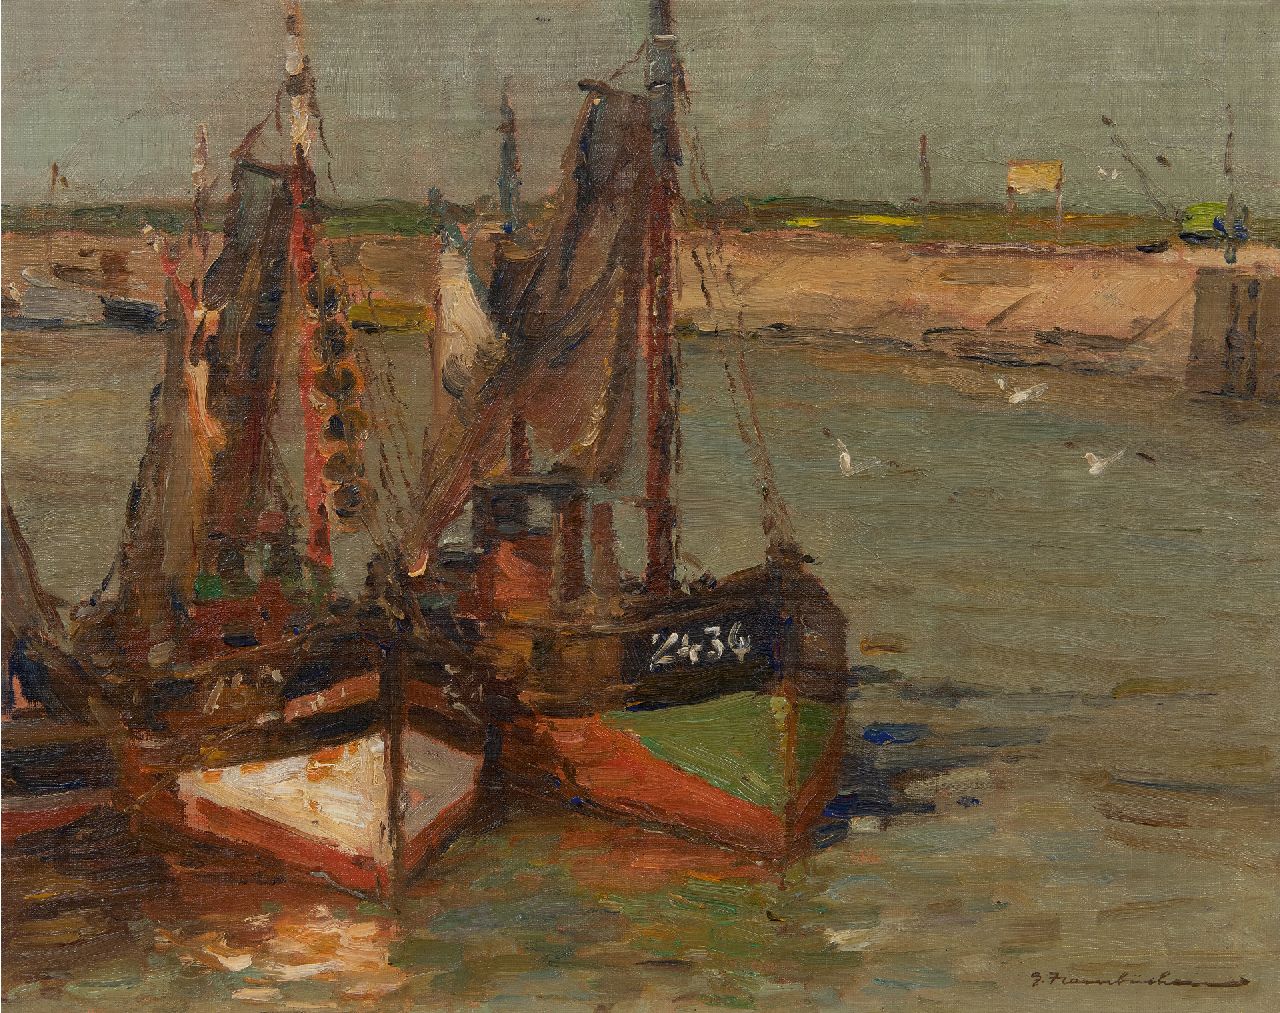 Hambüchen G.  | Georg Hambüchen | Paintings offered for sale | Fishing boats in the port of Zeebrugge, Belgium, oil on canvas 40.2 x 50.4 cm, signed l.r.